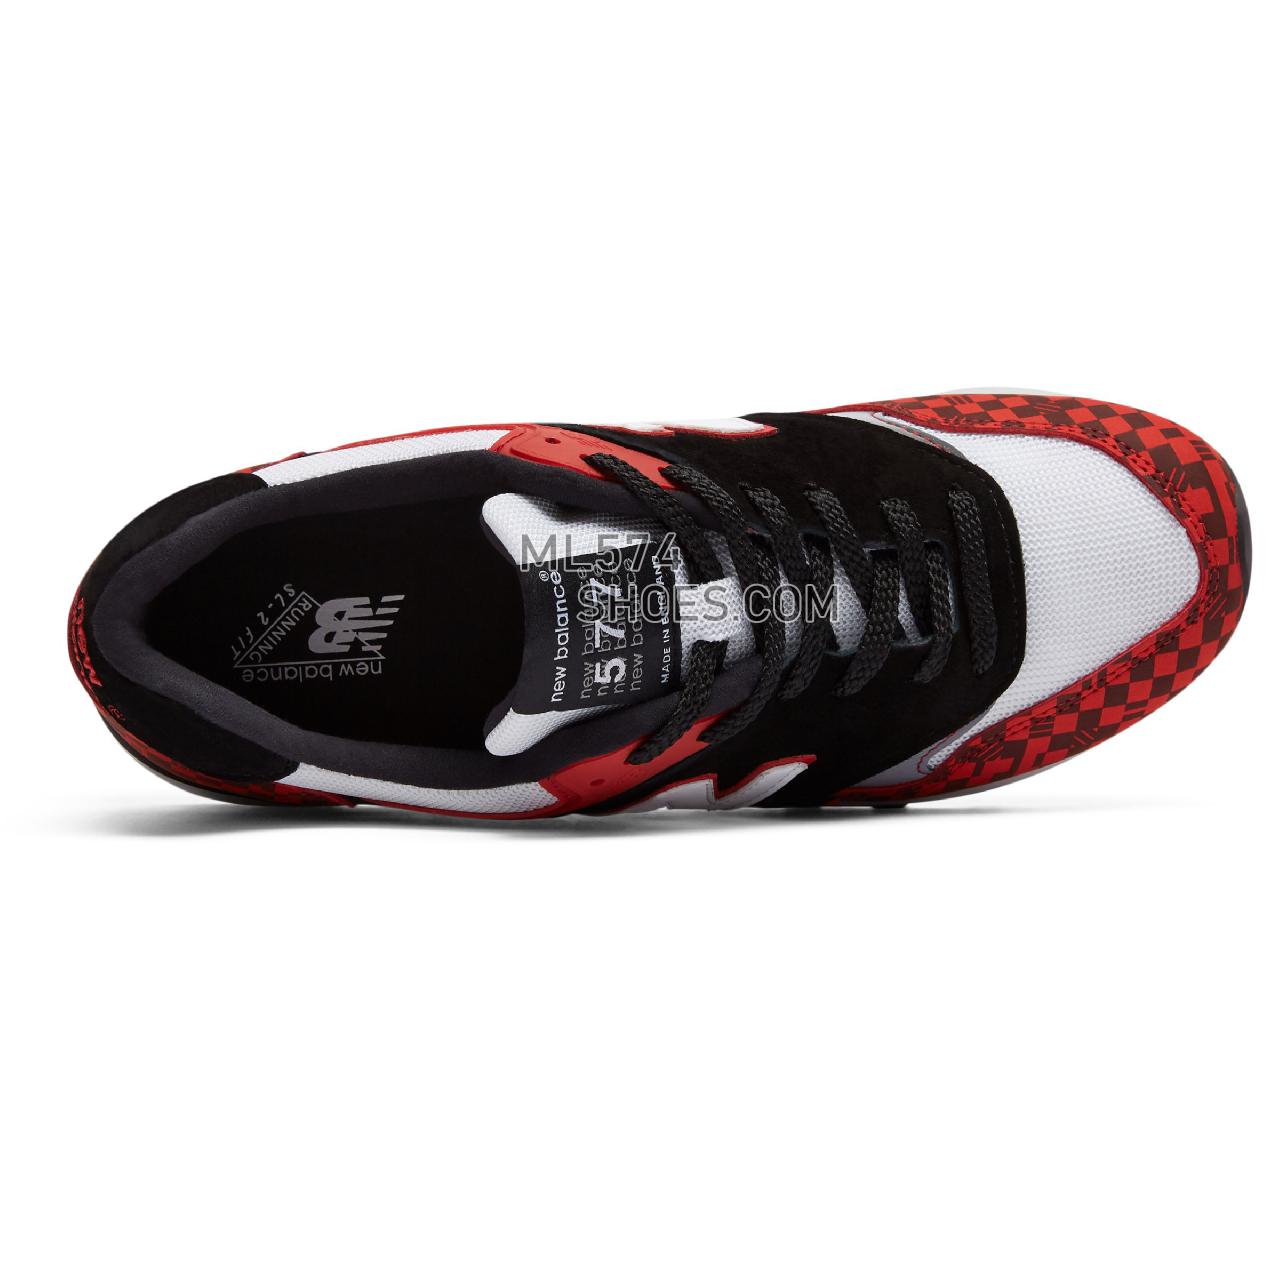 New Balance Made in UK 577 - Men's Made in USA And UK Sneakers - Black with White and Red - M577HJK